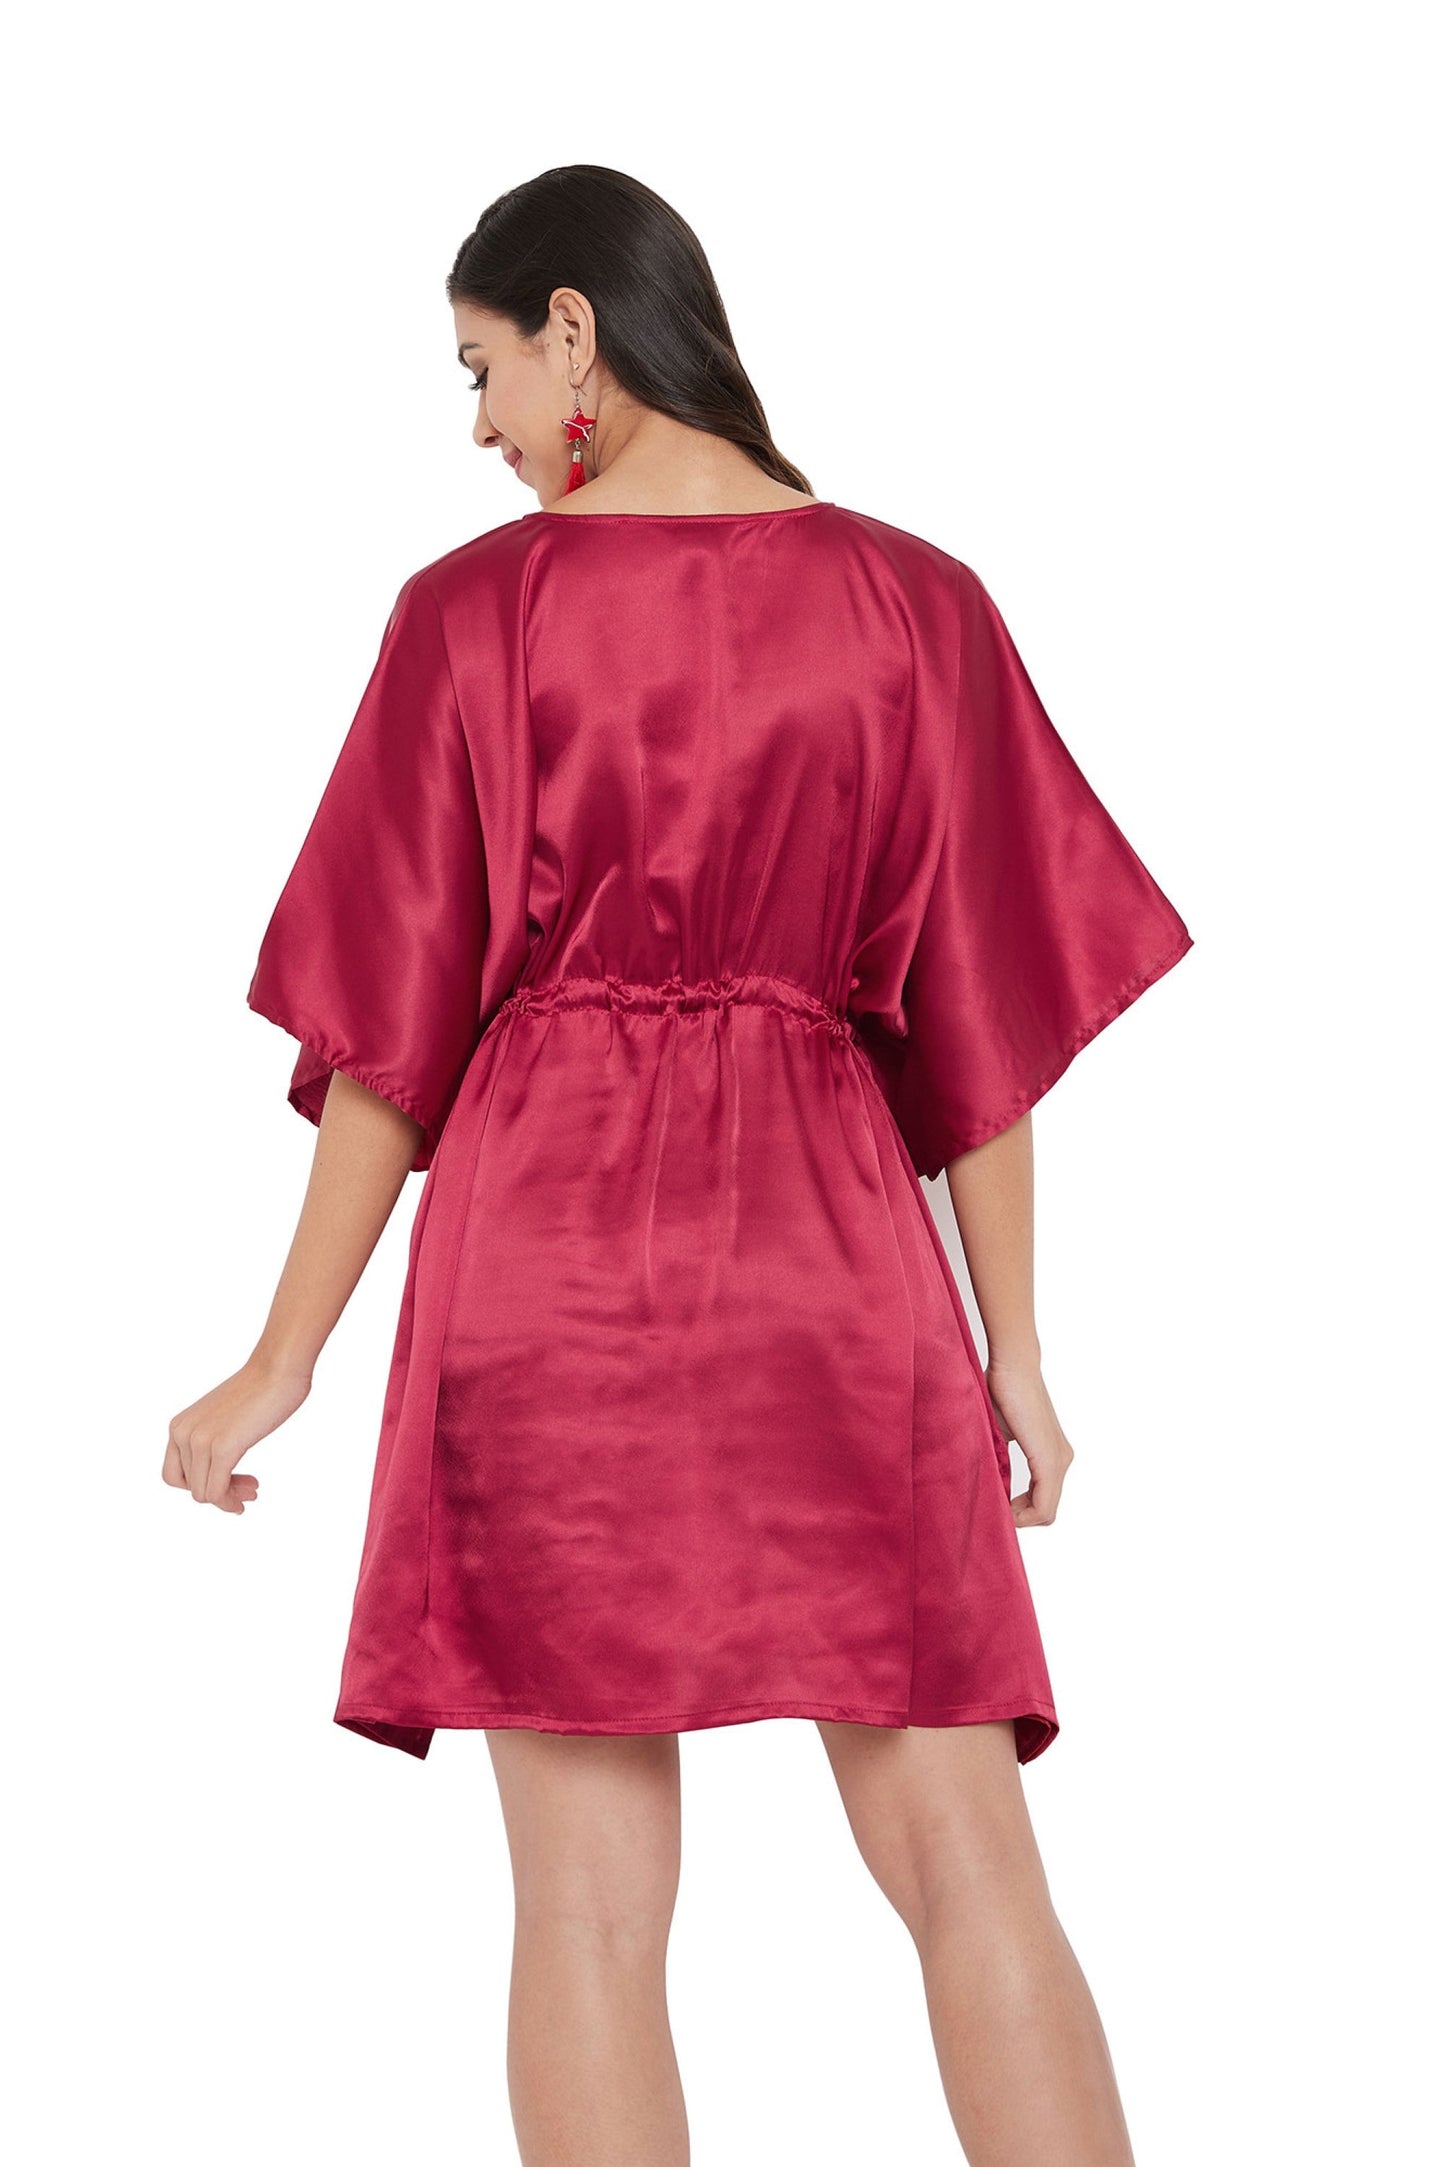 Red Satin Solid Tunic